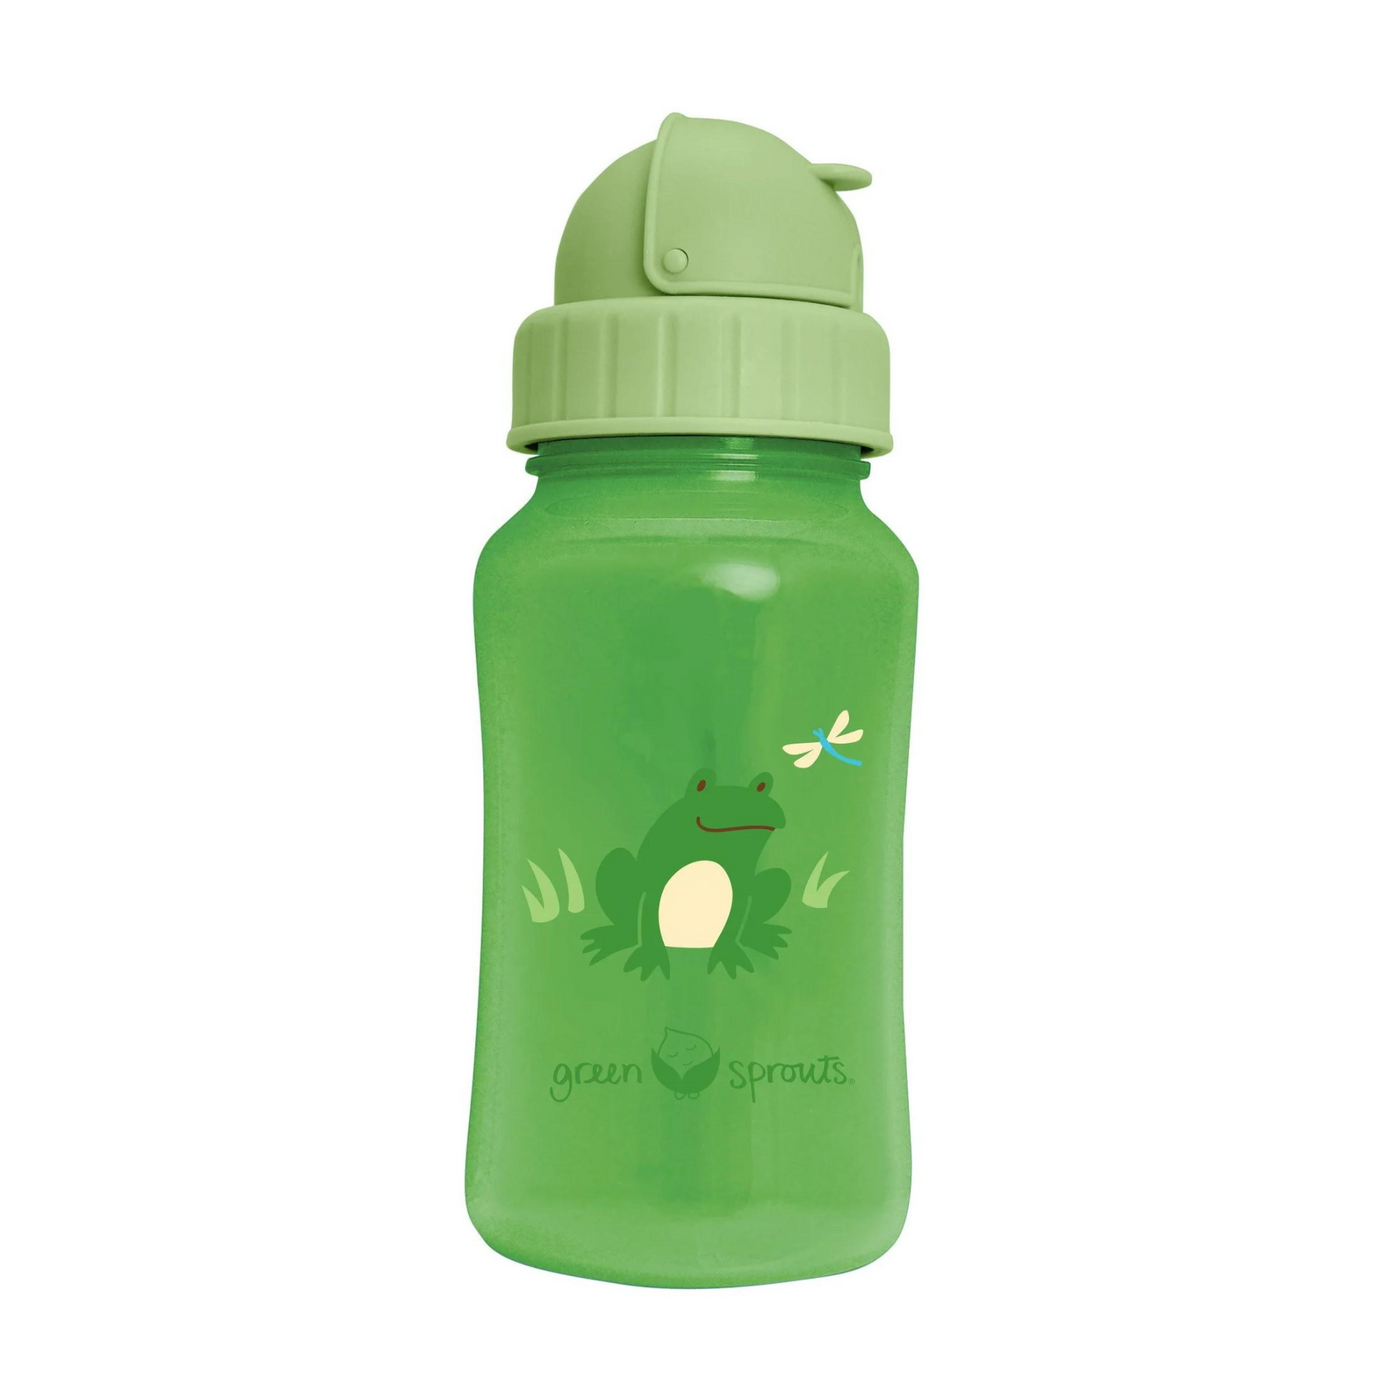 Healthy Sprouts Silicone Sippy Lids (5 Pack) - Make Any Cup a Sippy Cu